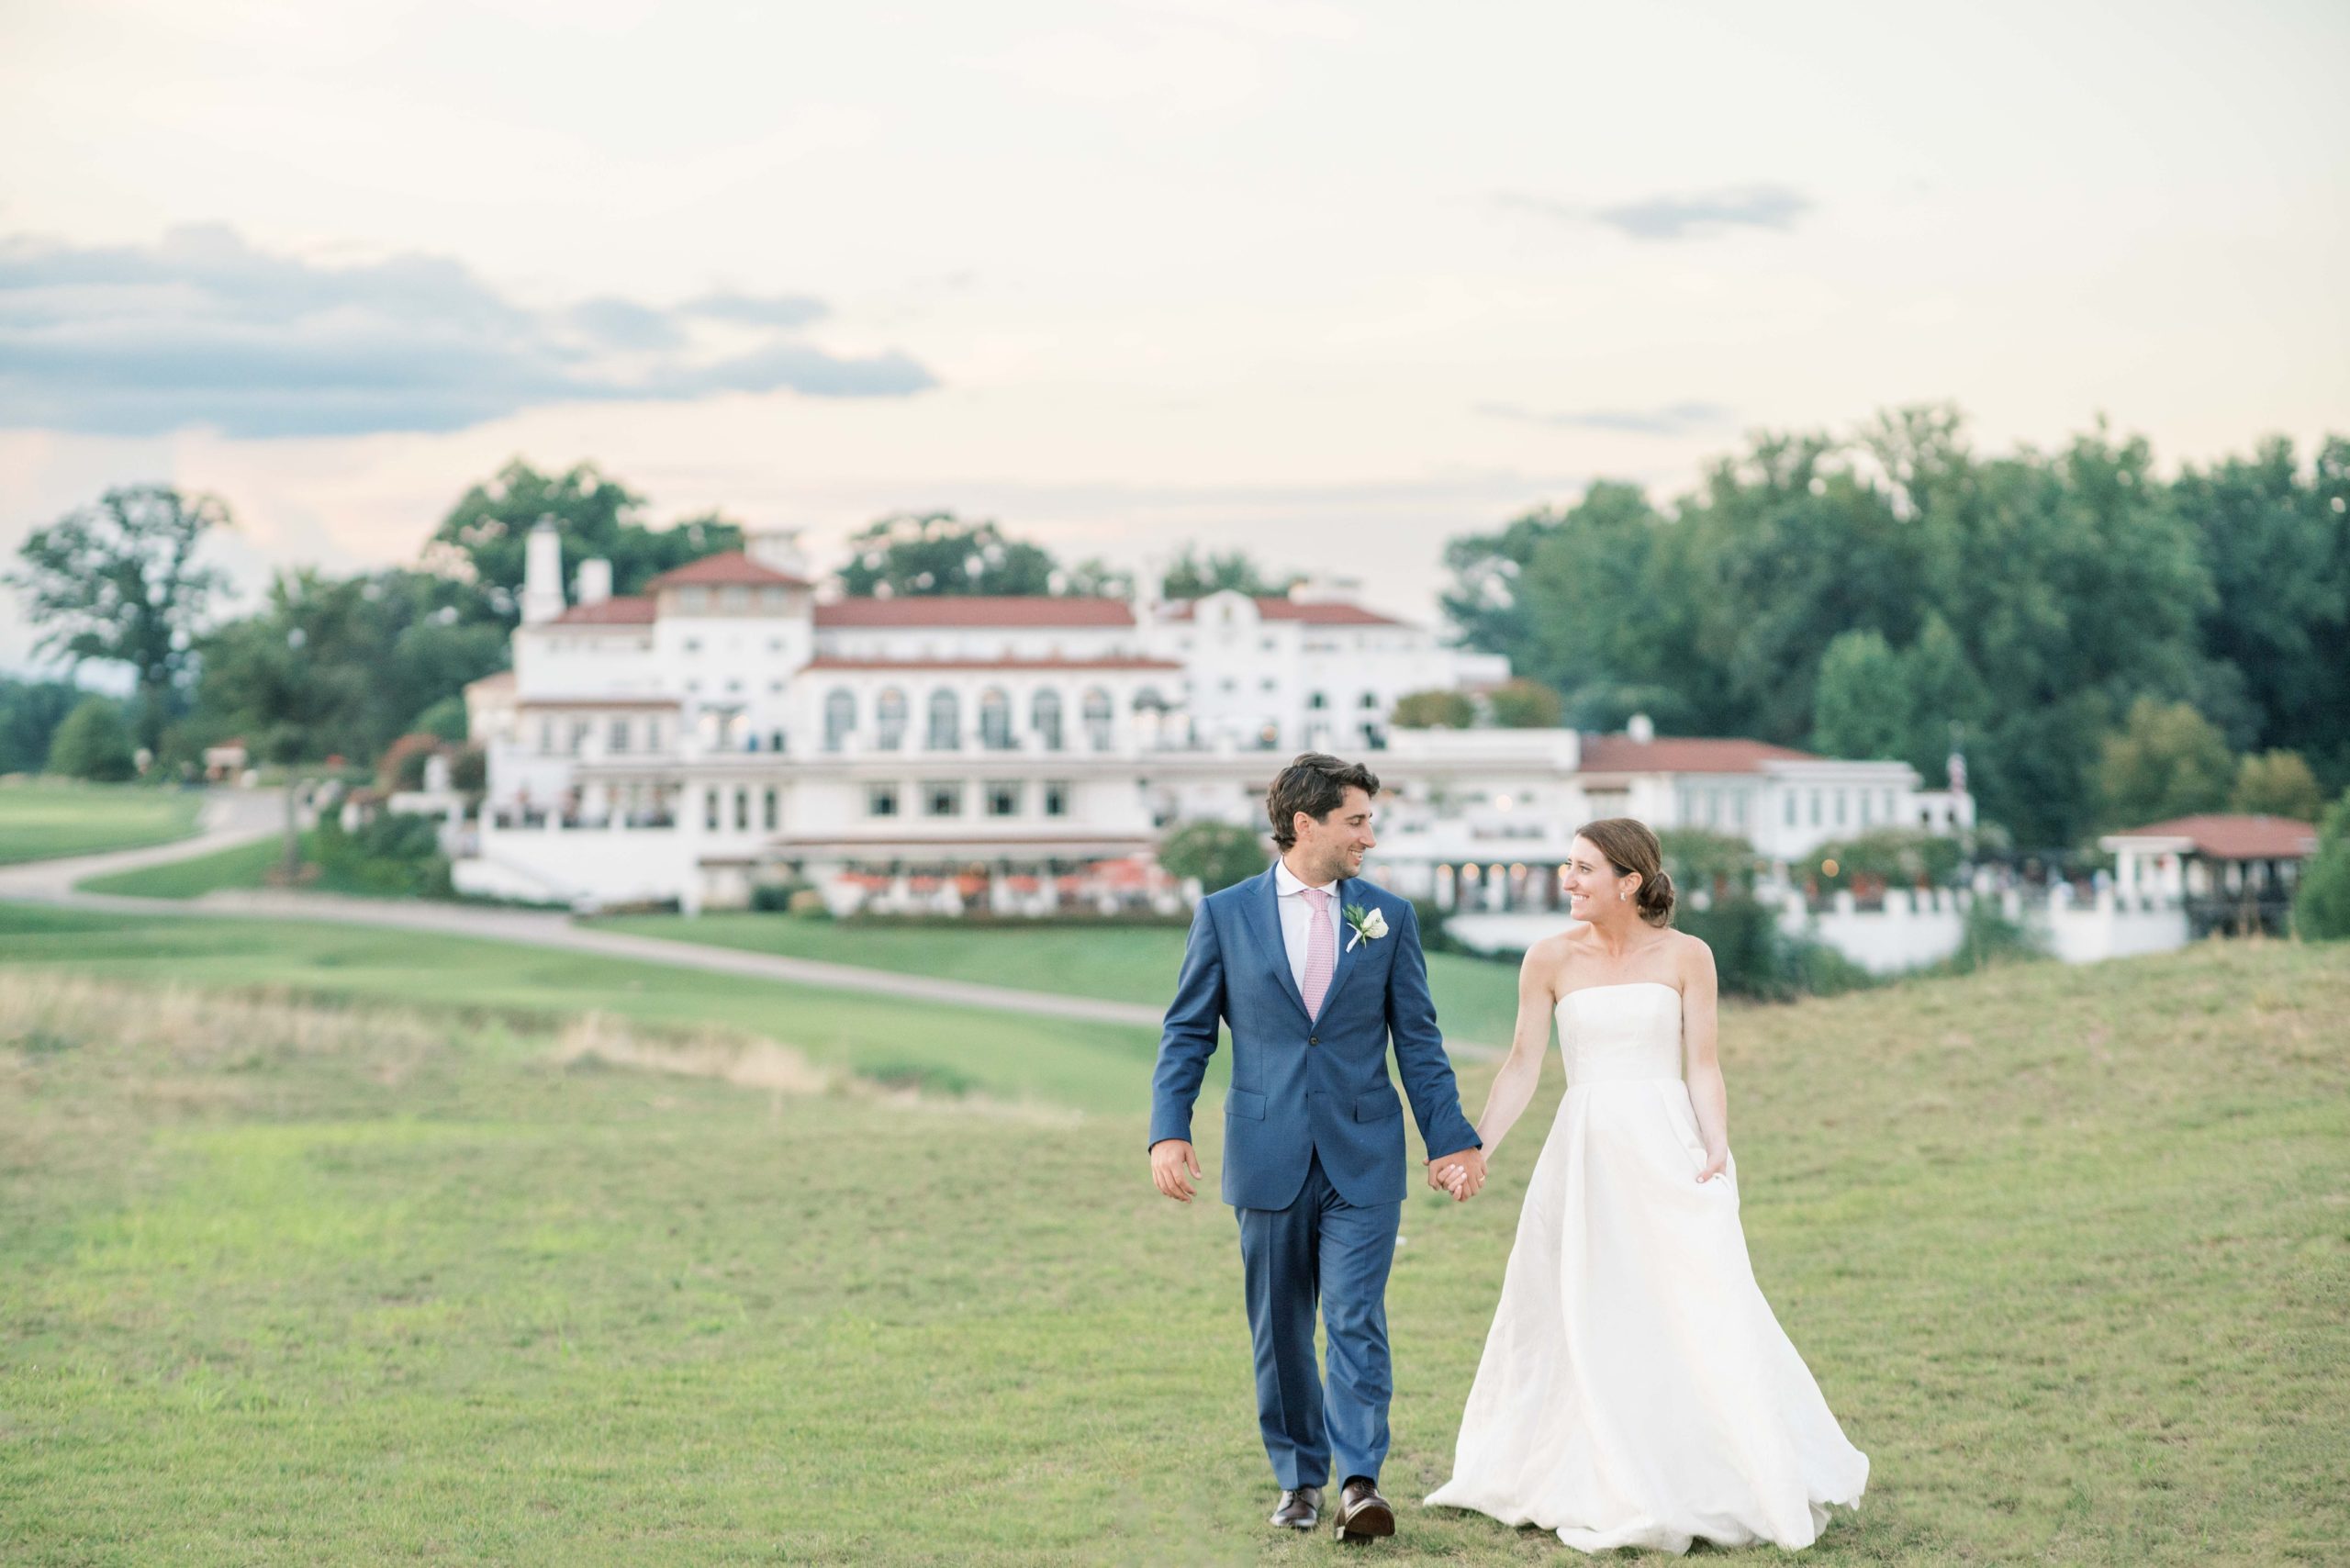 An outdoor summer wedding at the Congressional Country Club in Washington, DC with wedding photography by Alicia Lacey.